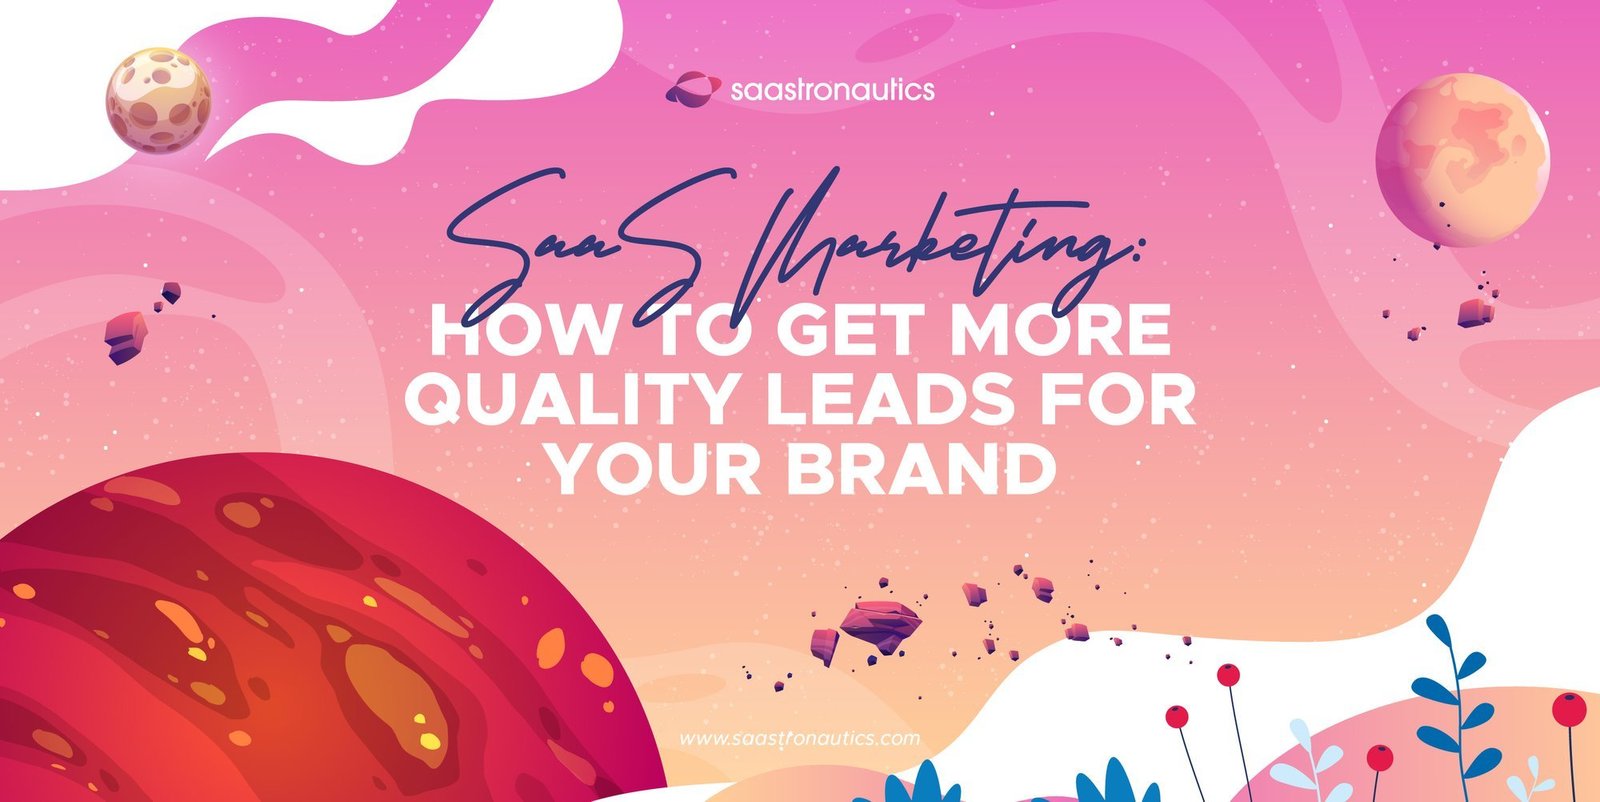 SaaS Marketing: How to Get More Quality Leads for Your Brand